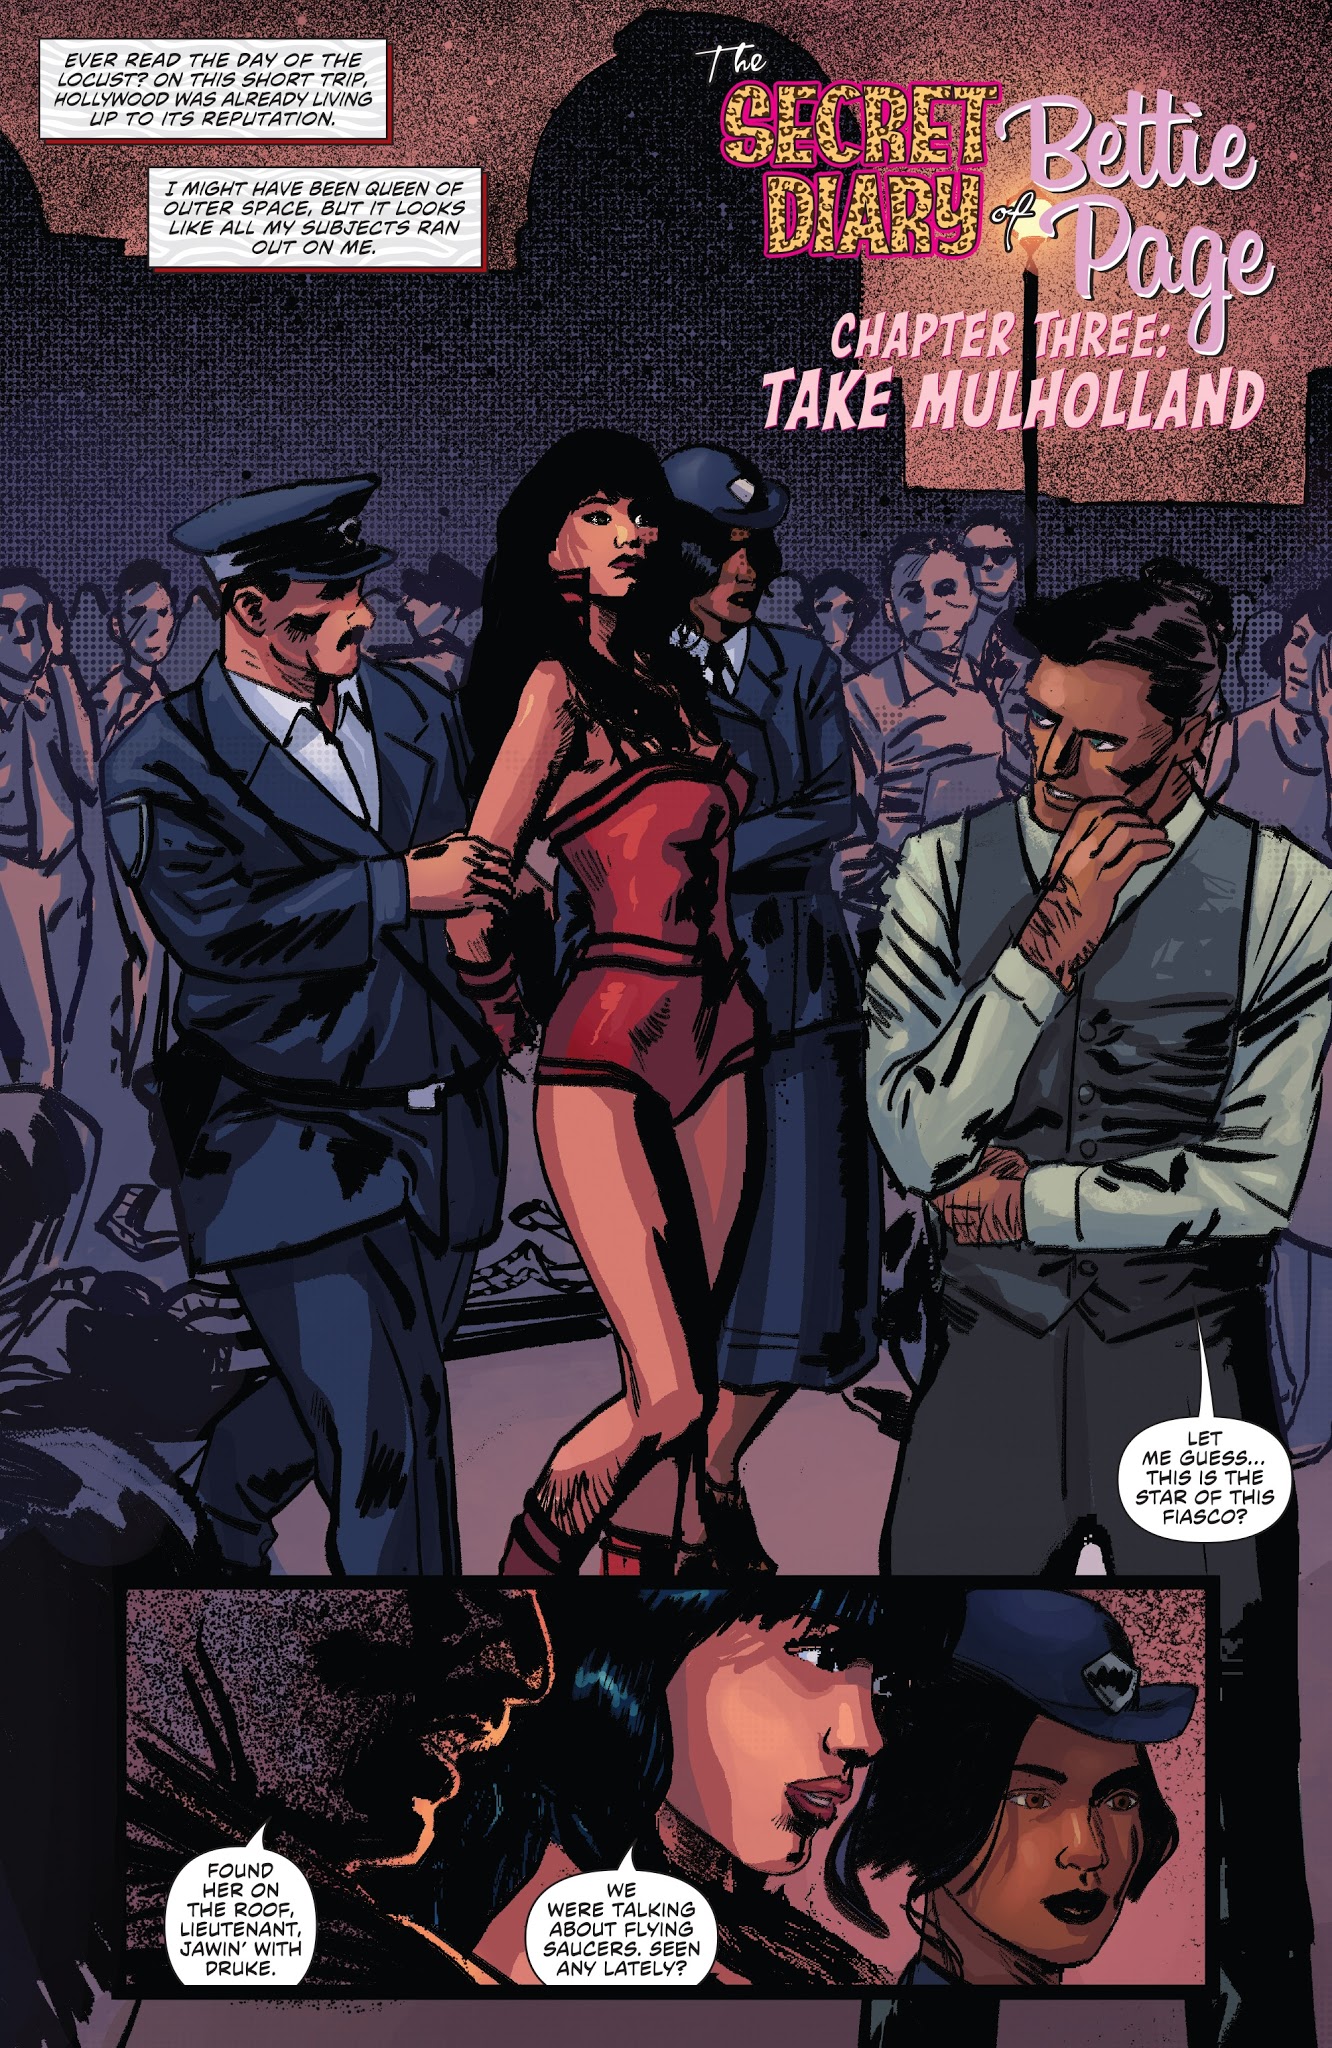 Read online Bettie Page comic -  Issue #3 - 6